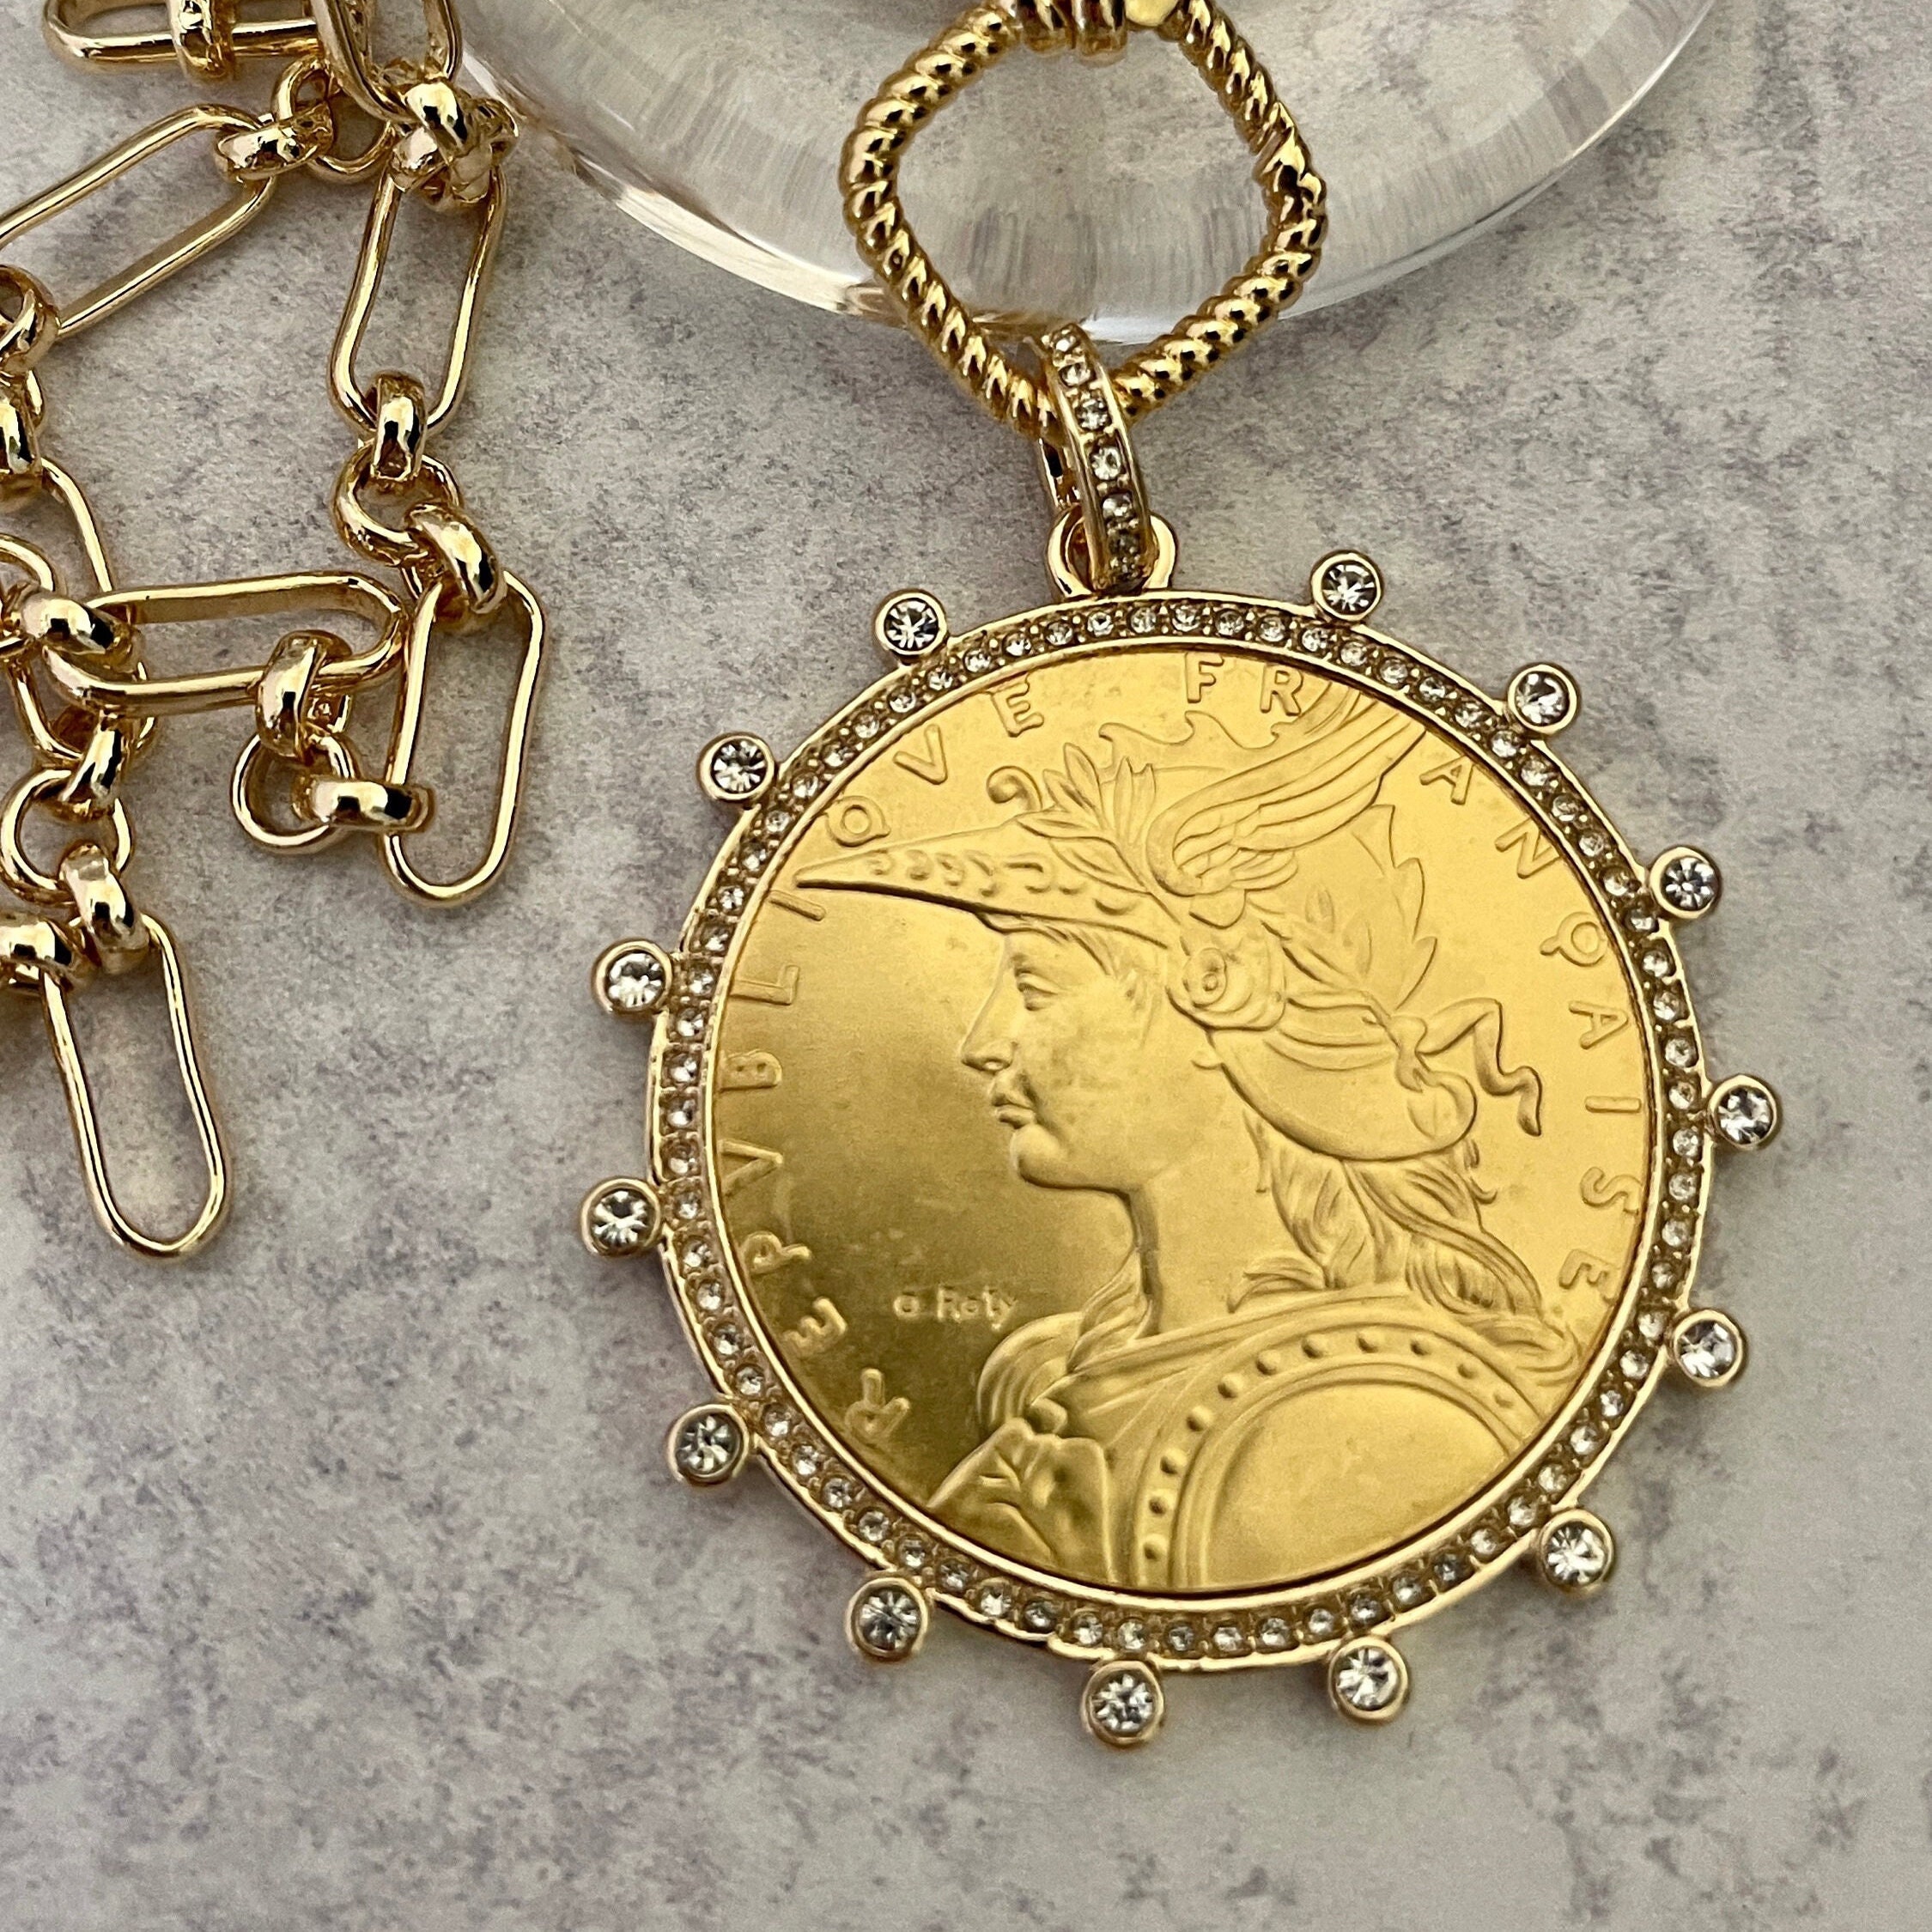 Marianne Gold Coin Necklace